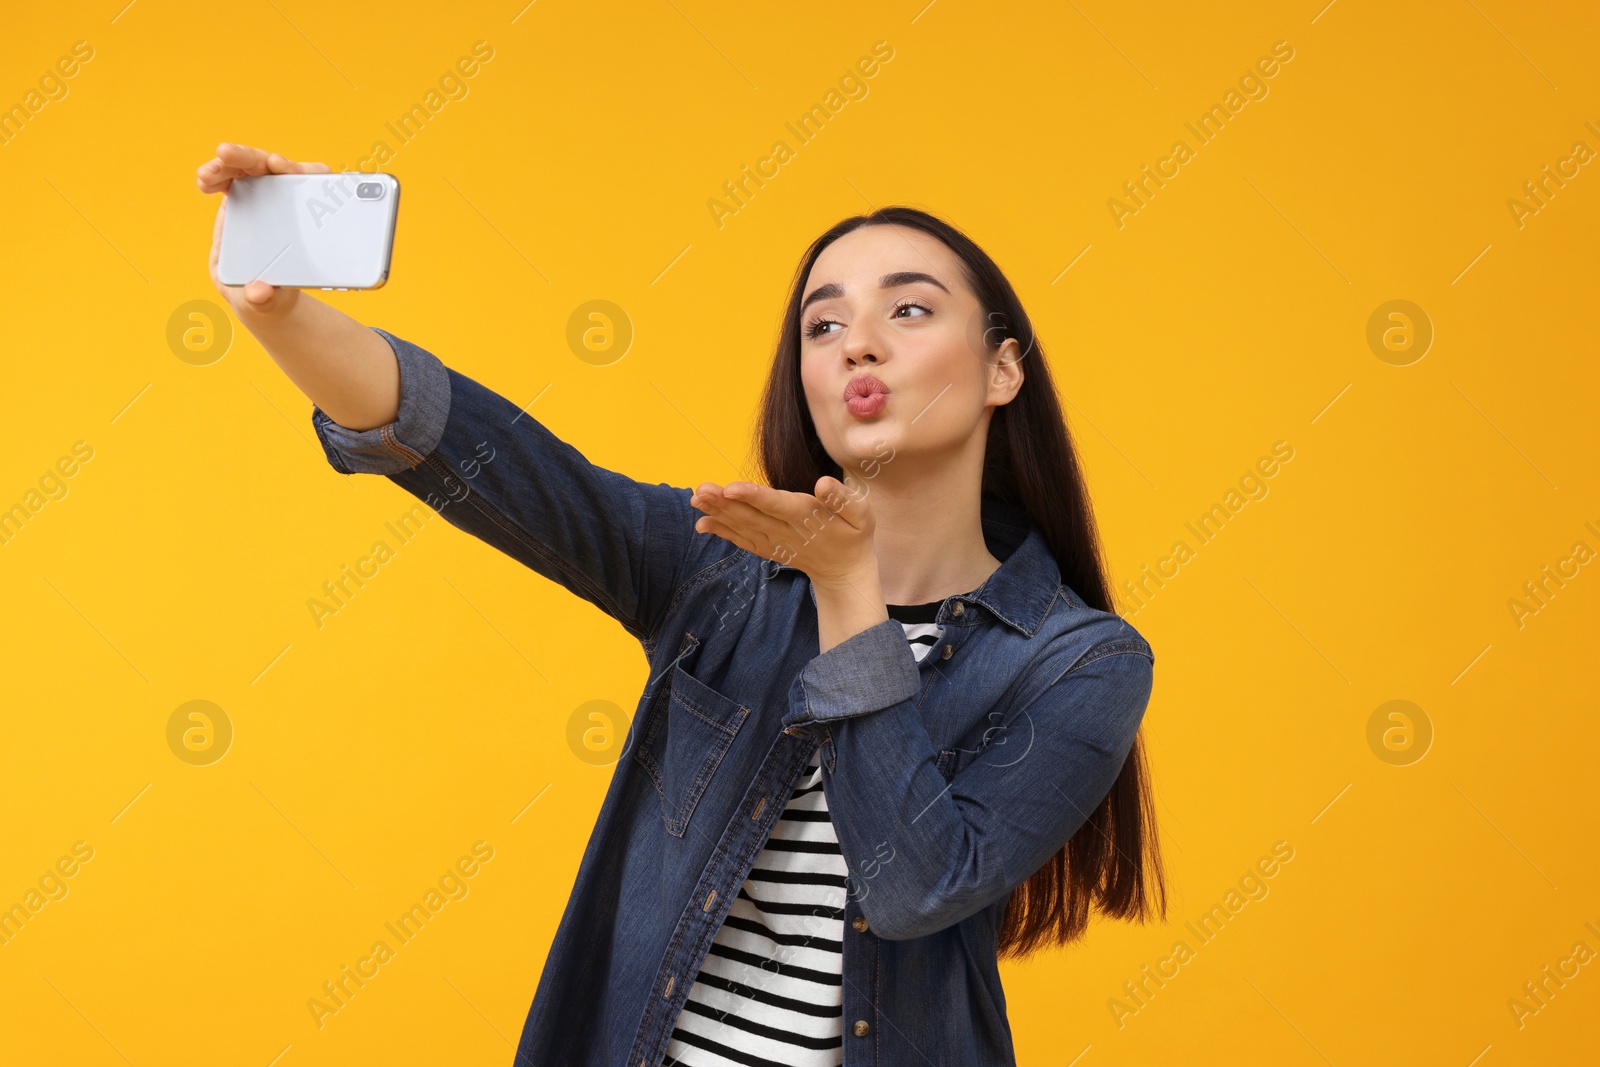 Photo of Young woman taking selfie with smartphone and blowing kiss on yellow background